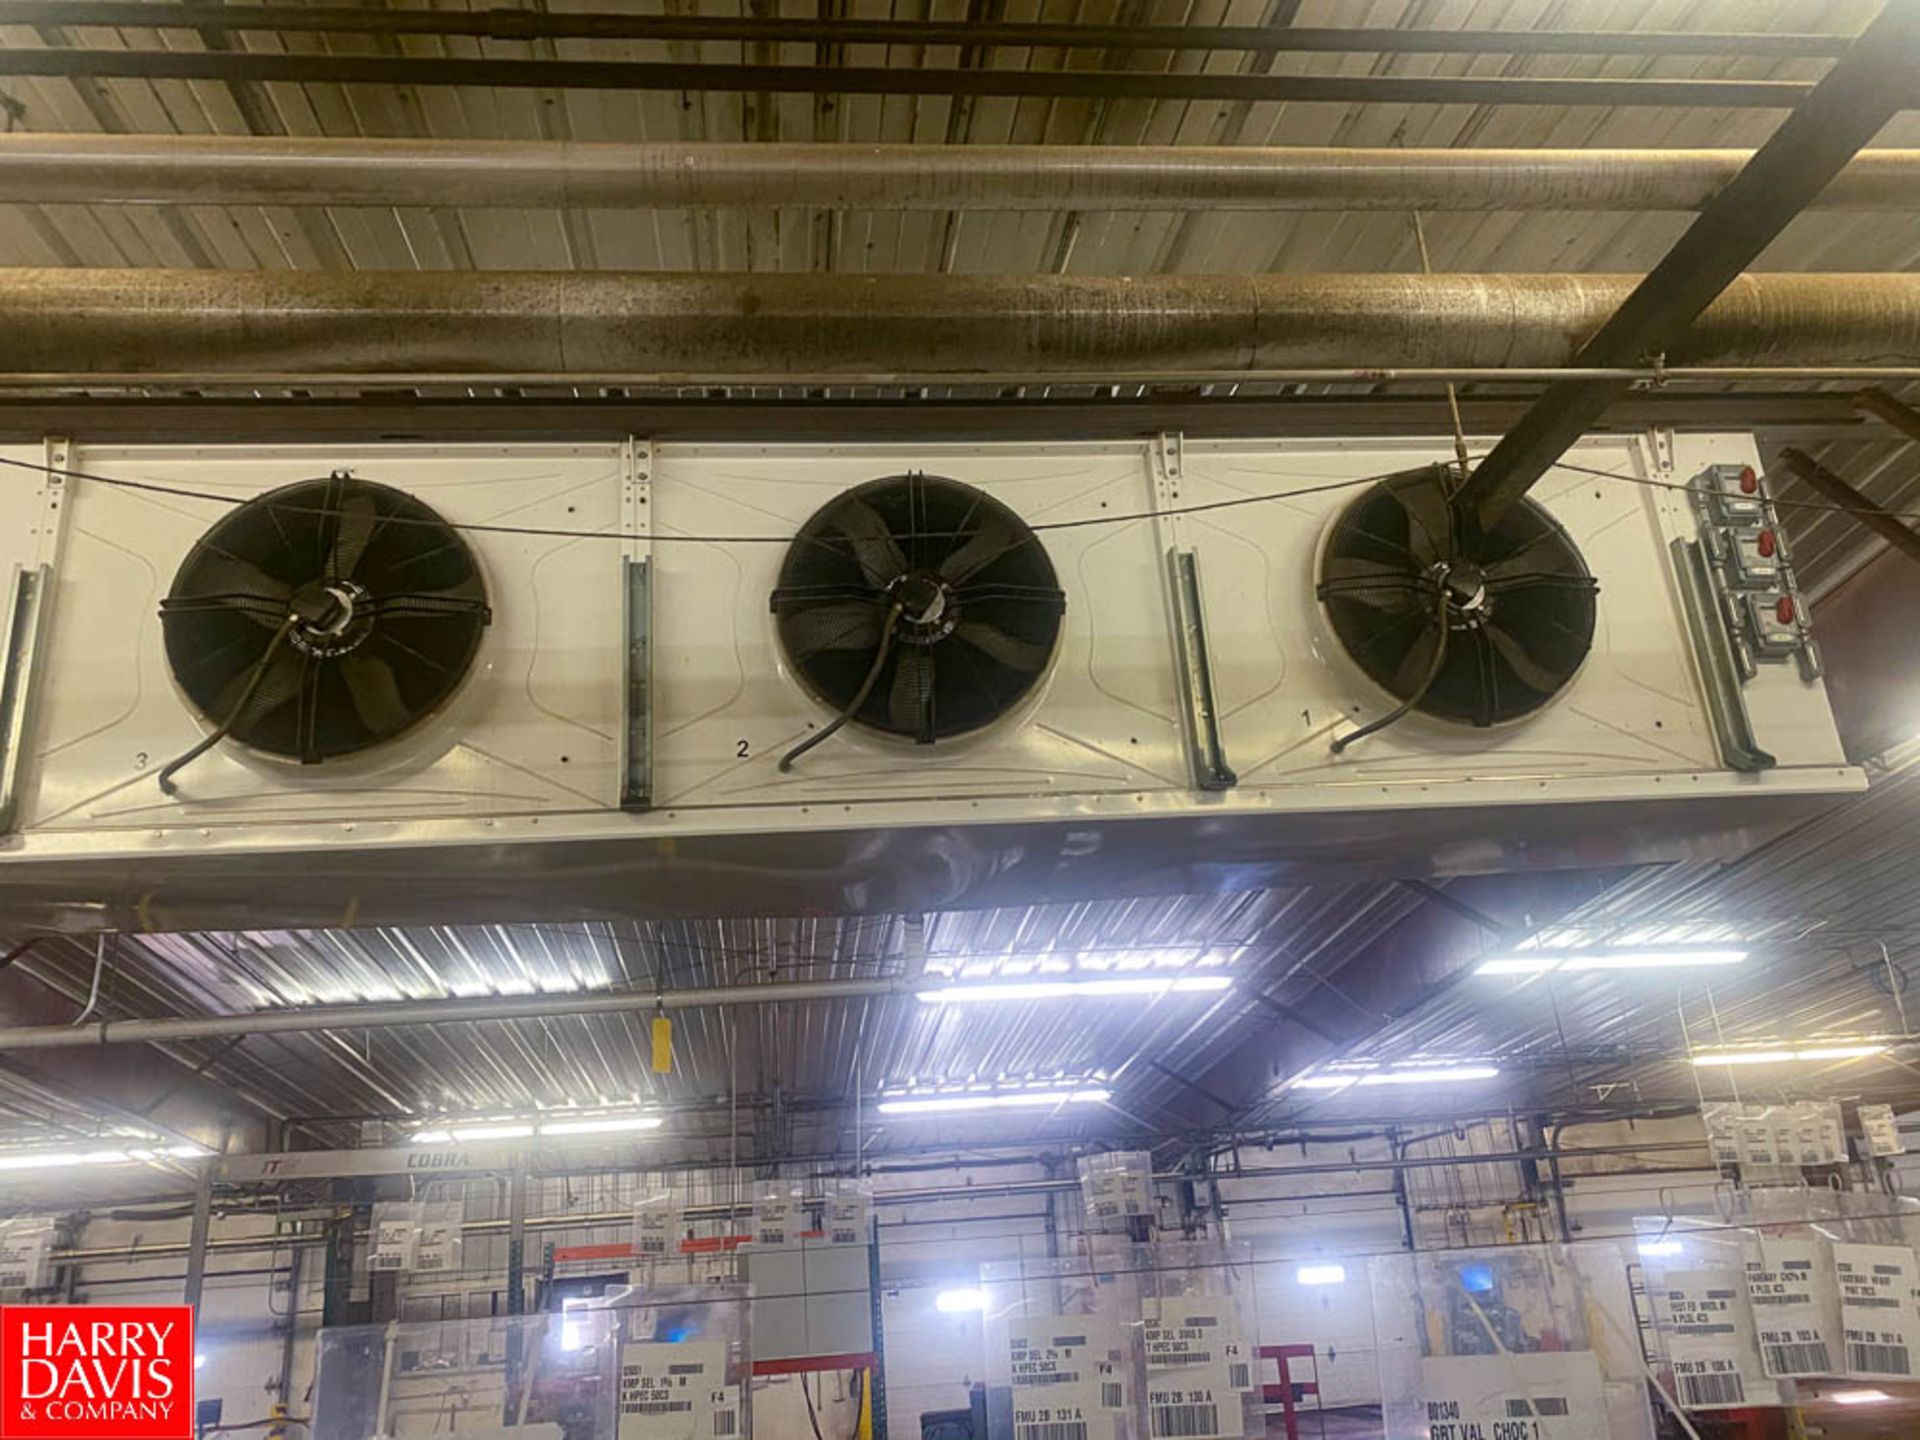 Gunther 3 Fan Chiller Model: 510058 With Vilter Controls And Valves - Rigging Fee: $ 1500 - Image 3 of 3